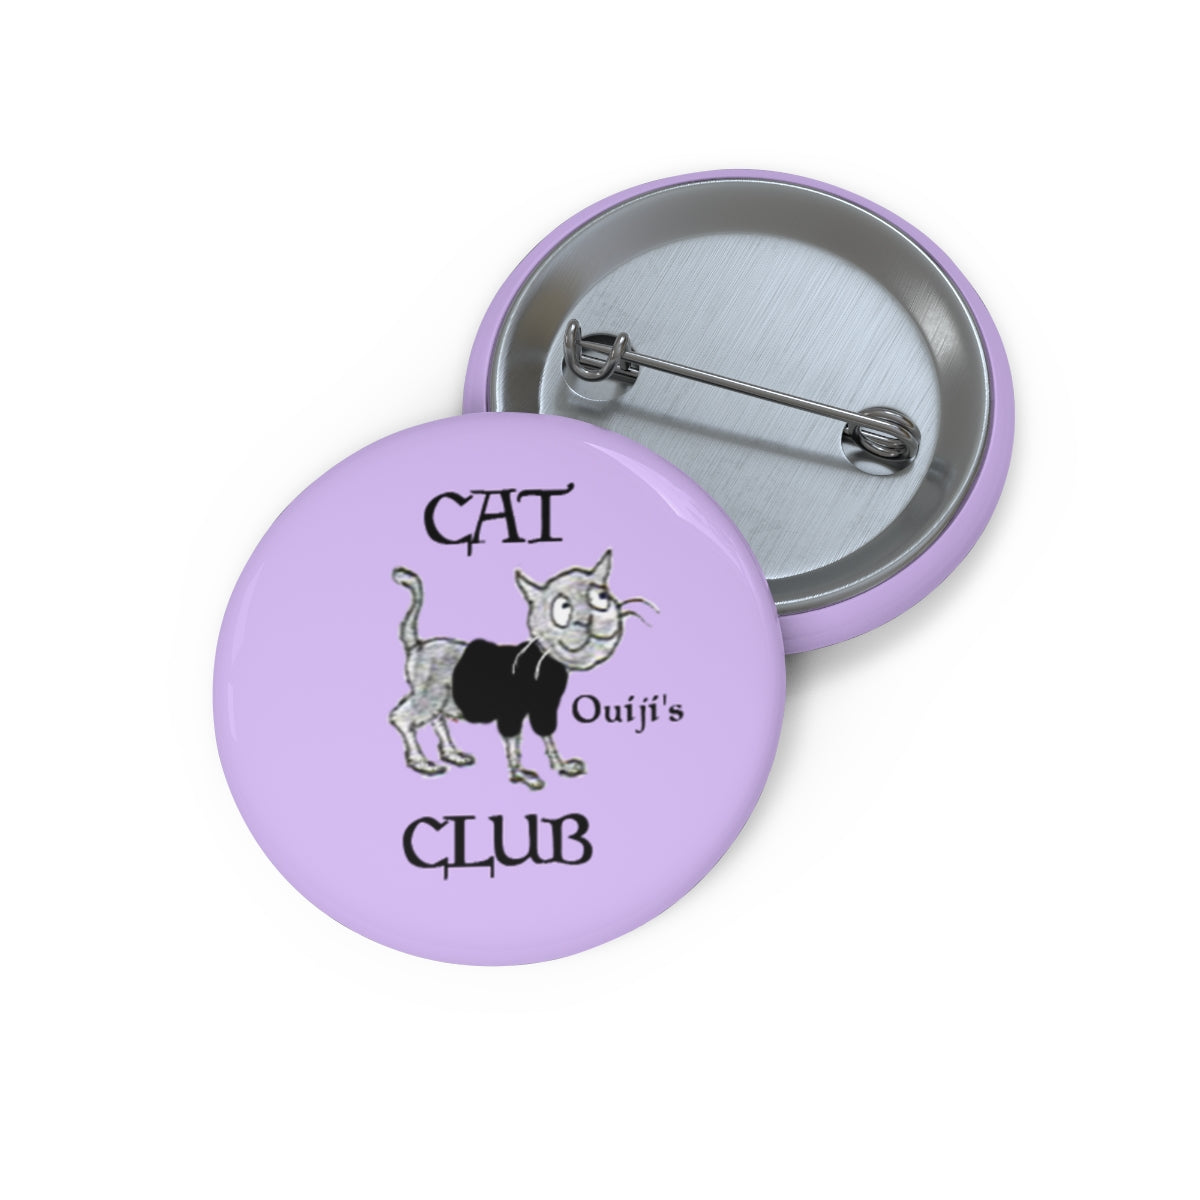 Ouiji's Cat Club - The Official Pin of The Goodbye Family